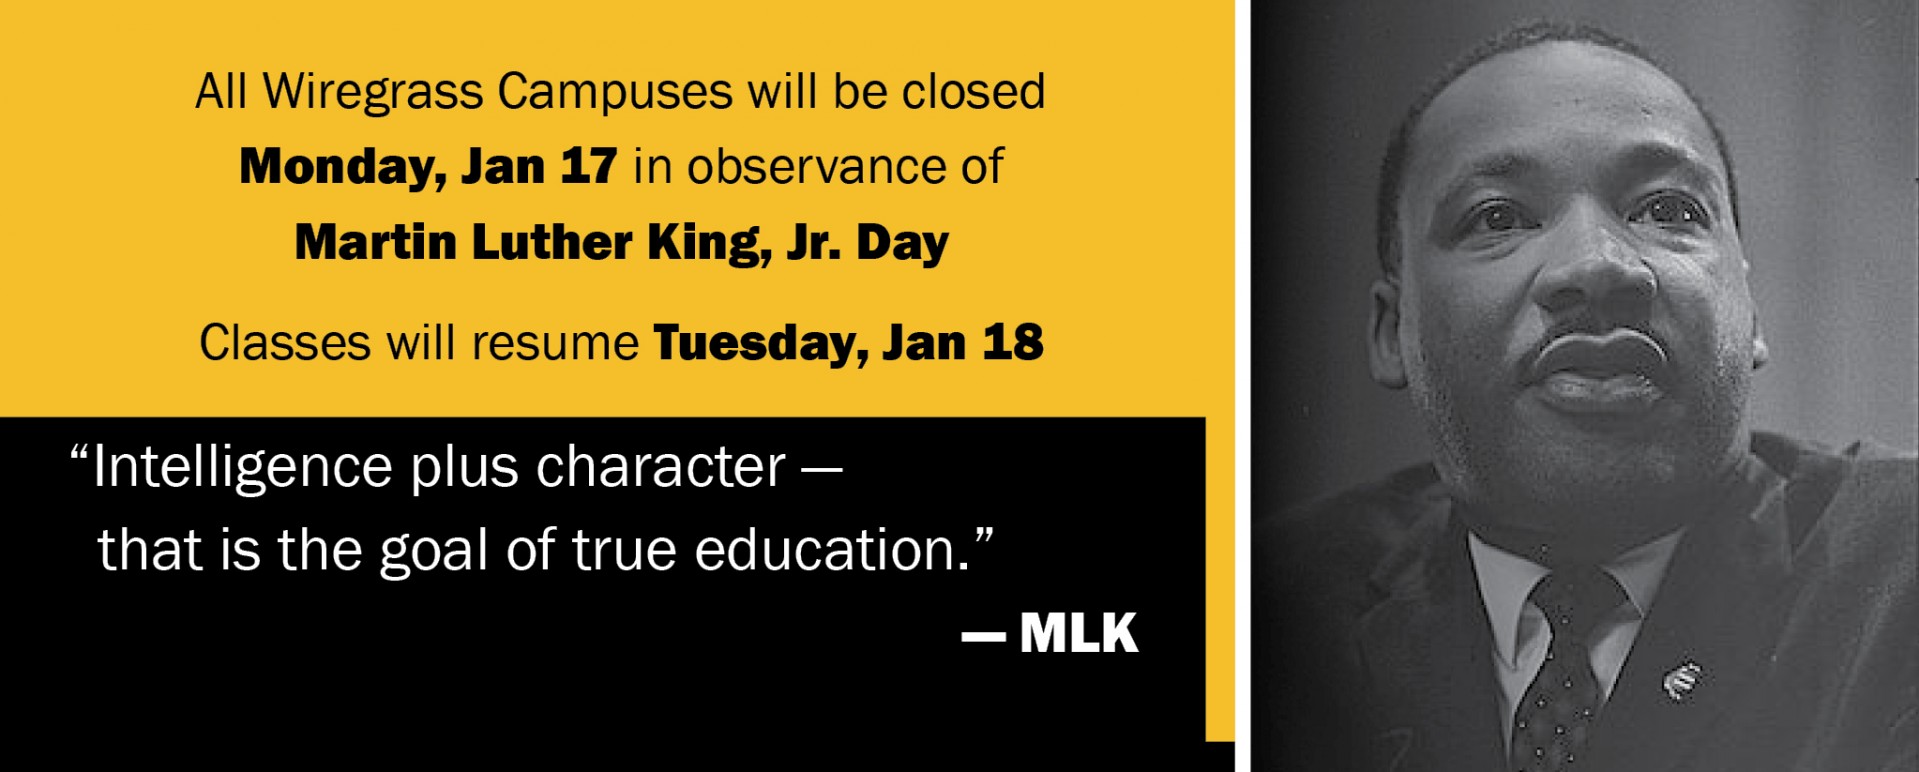 Campuses will be closed Monday, January 17th in observance of Martin Luther King, Jr. Day.